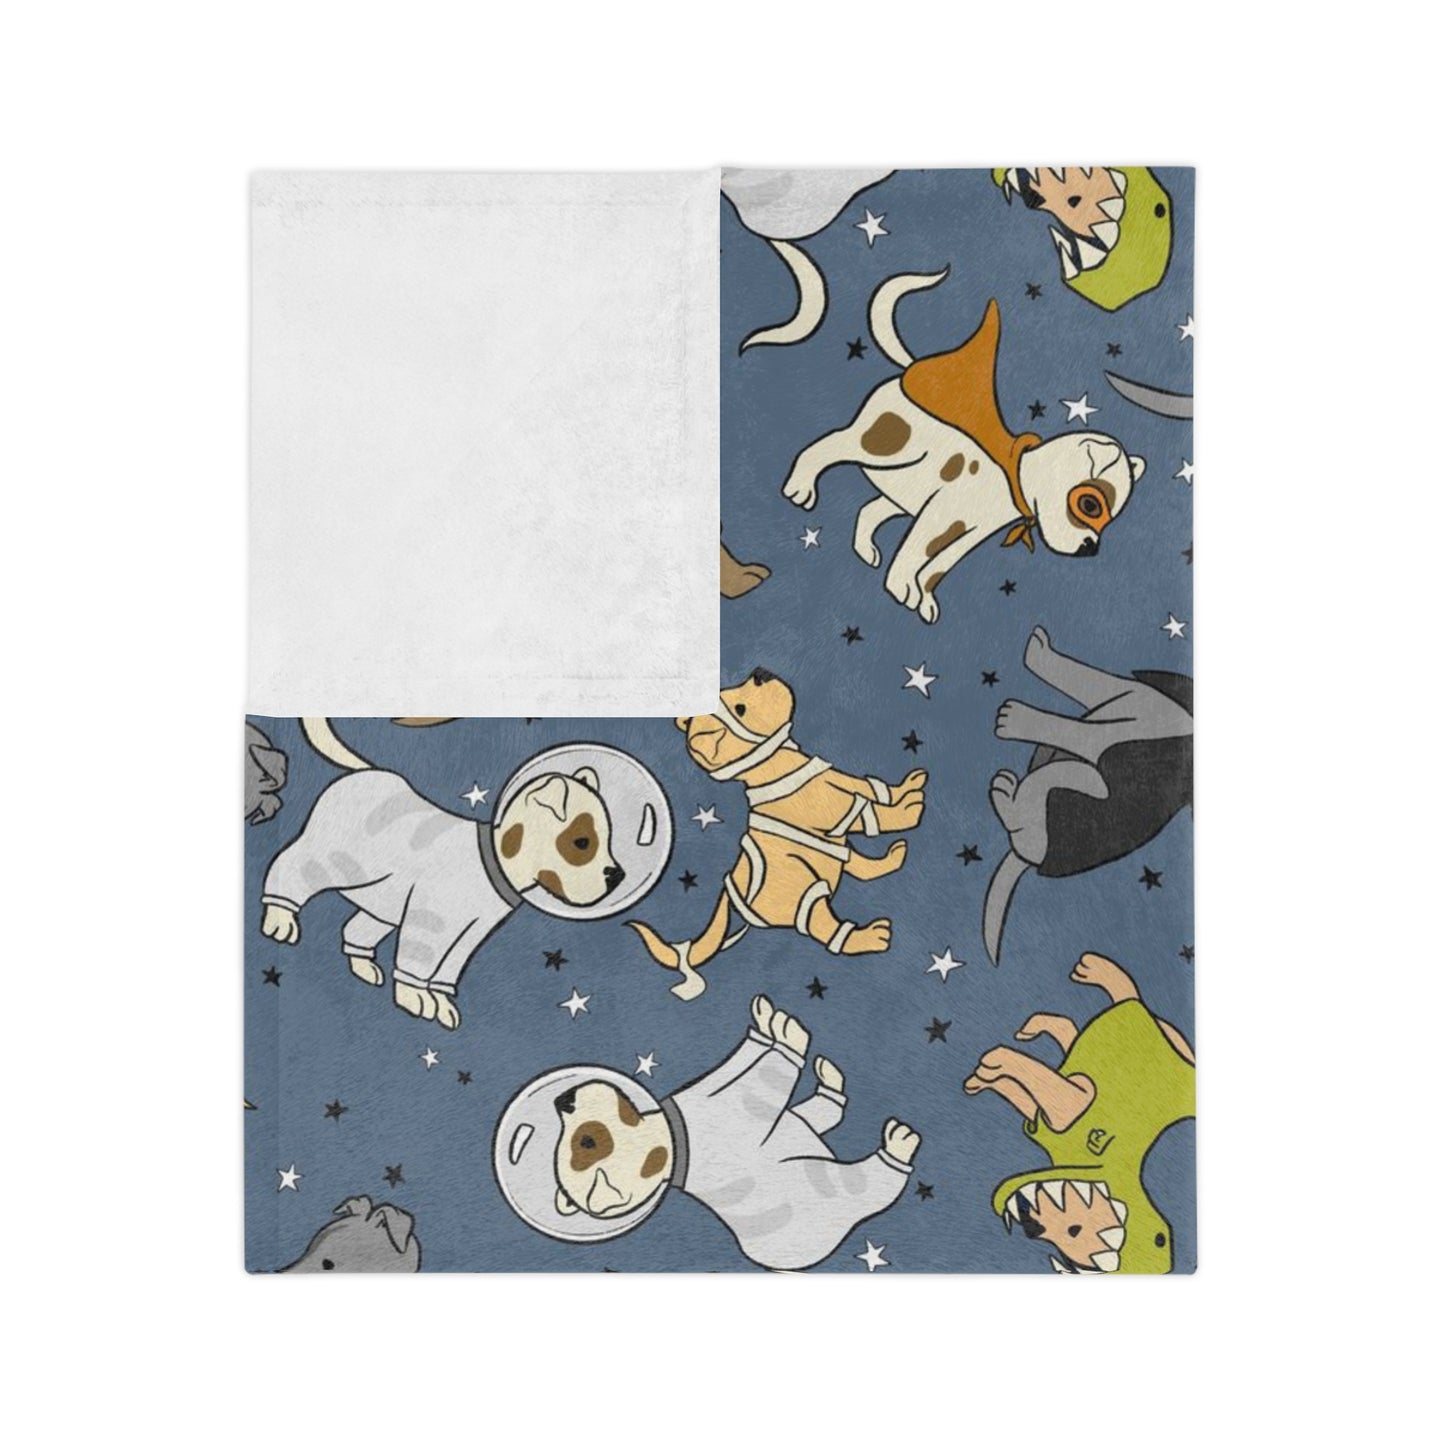 Dogs with Halloween costumes Velveteen Minky Blanket for dog lovers and Halloween lovers.